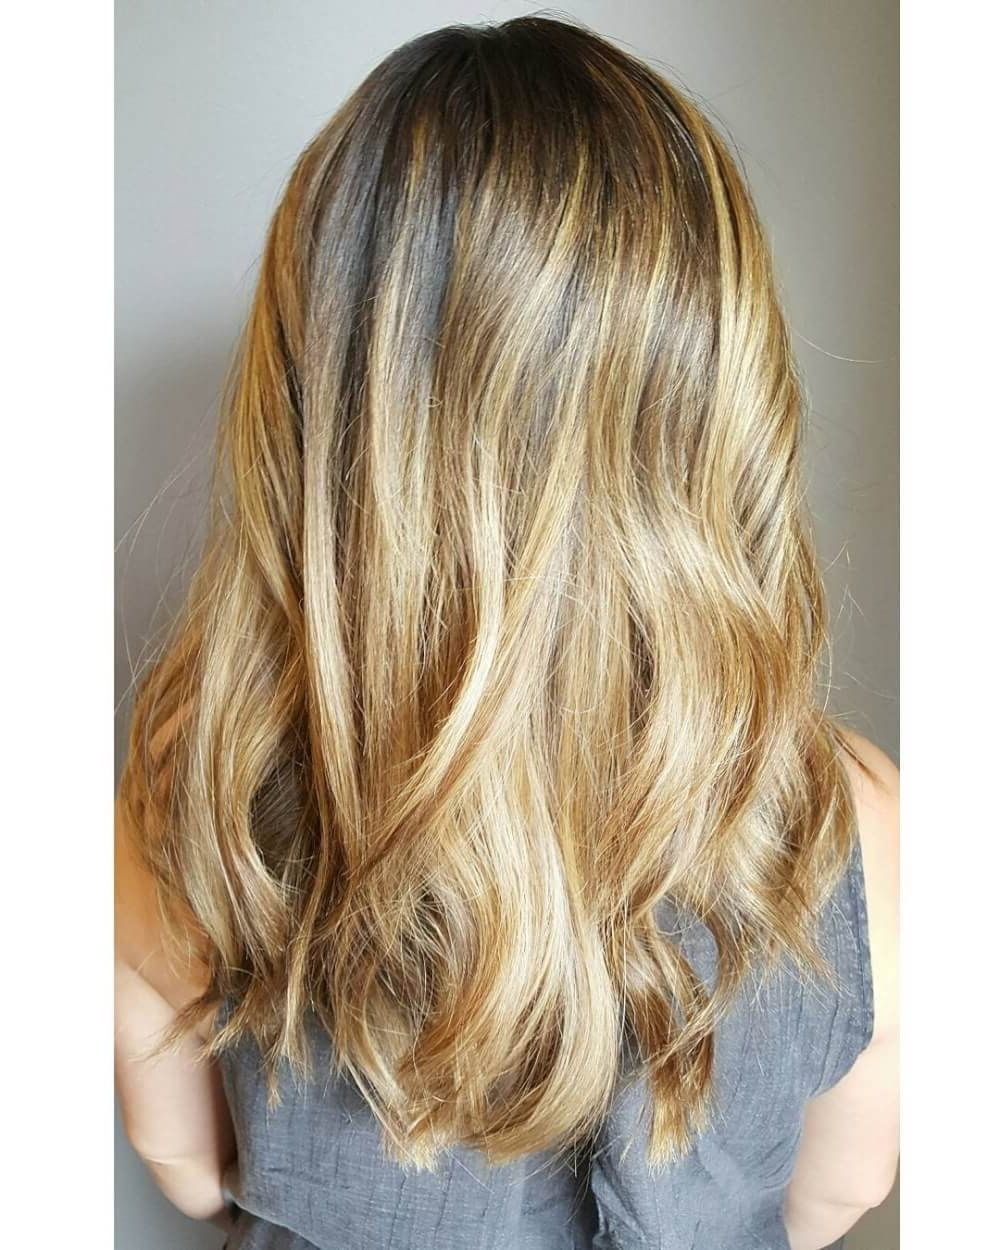 Preferred White And Dirty Blonde Combo Hairstyles Intended For 38 Top Blonde Highlights Of 2018 – Platinum, Ash, Dirty, Honey & Dark (View 17 of 20)